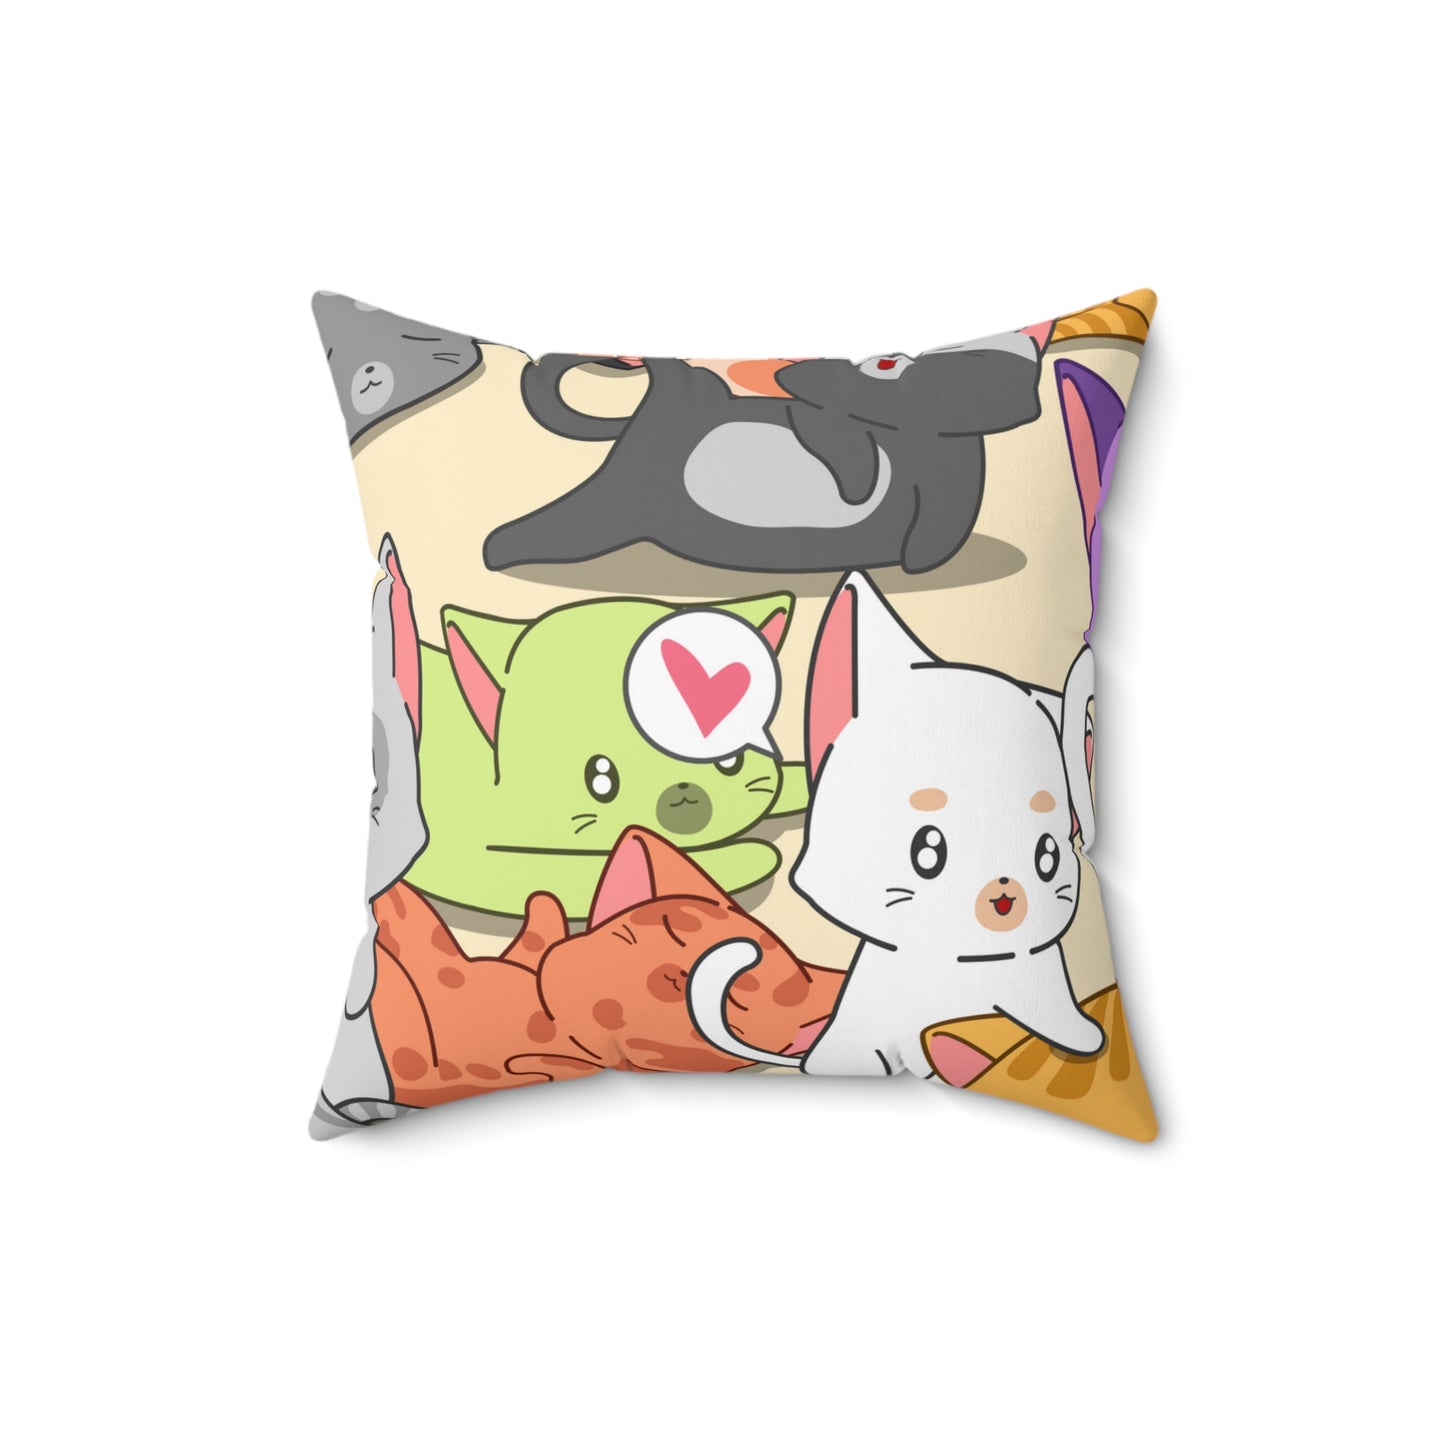 Kitty Playhouse Square Pillow